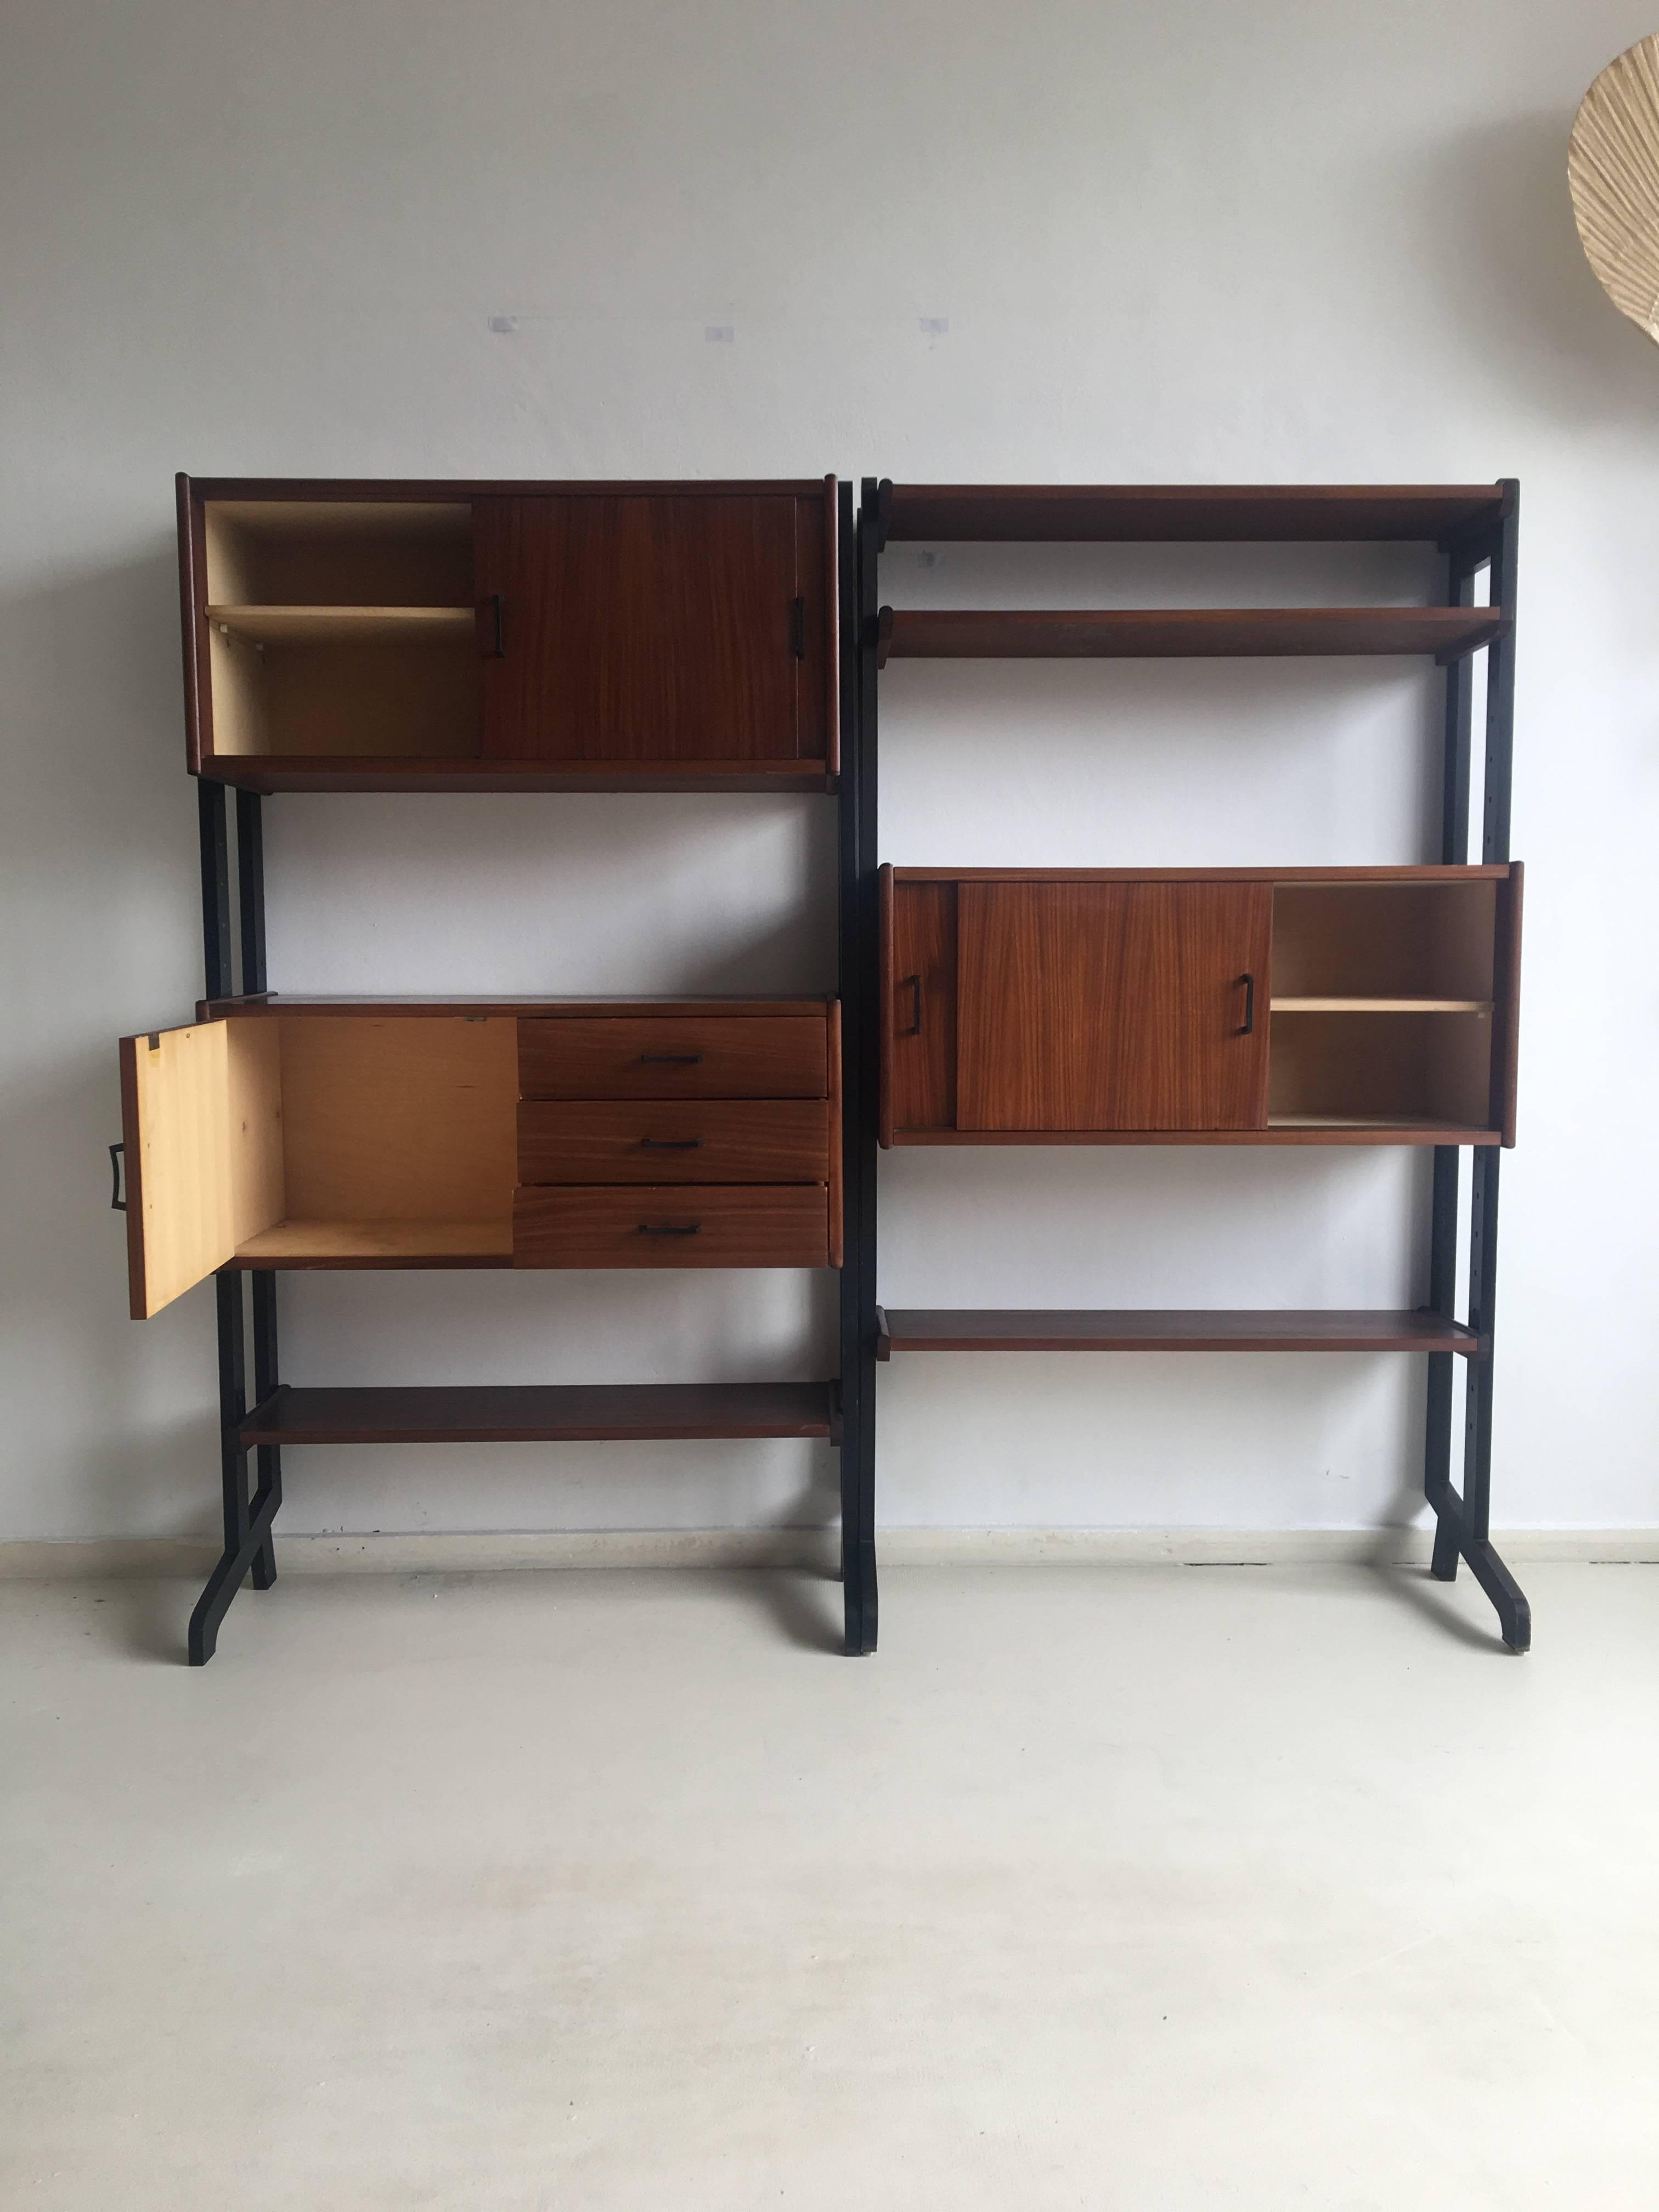 This wall unit was designed and manufactured in the Netherlands, circa1960s. It consists of two separate units in teak, next to each other. The pieces were designed to be adjustable in height and place. 

This wonderful system remains in a very